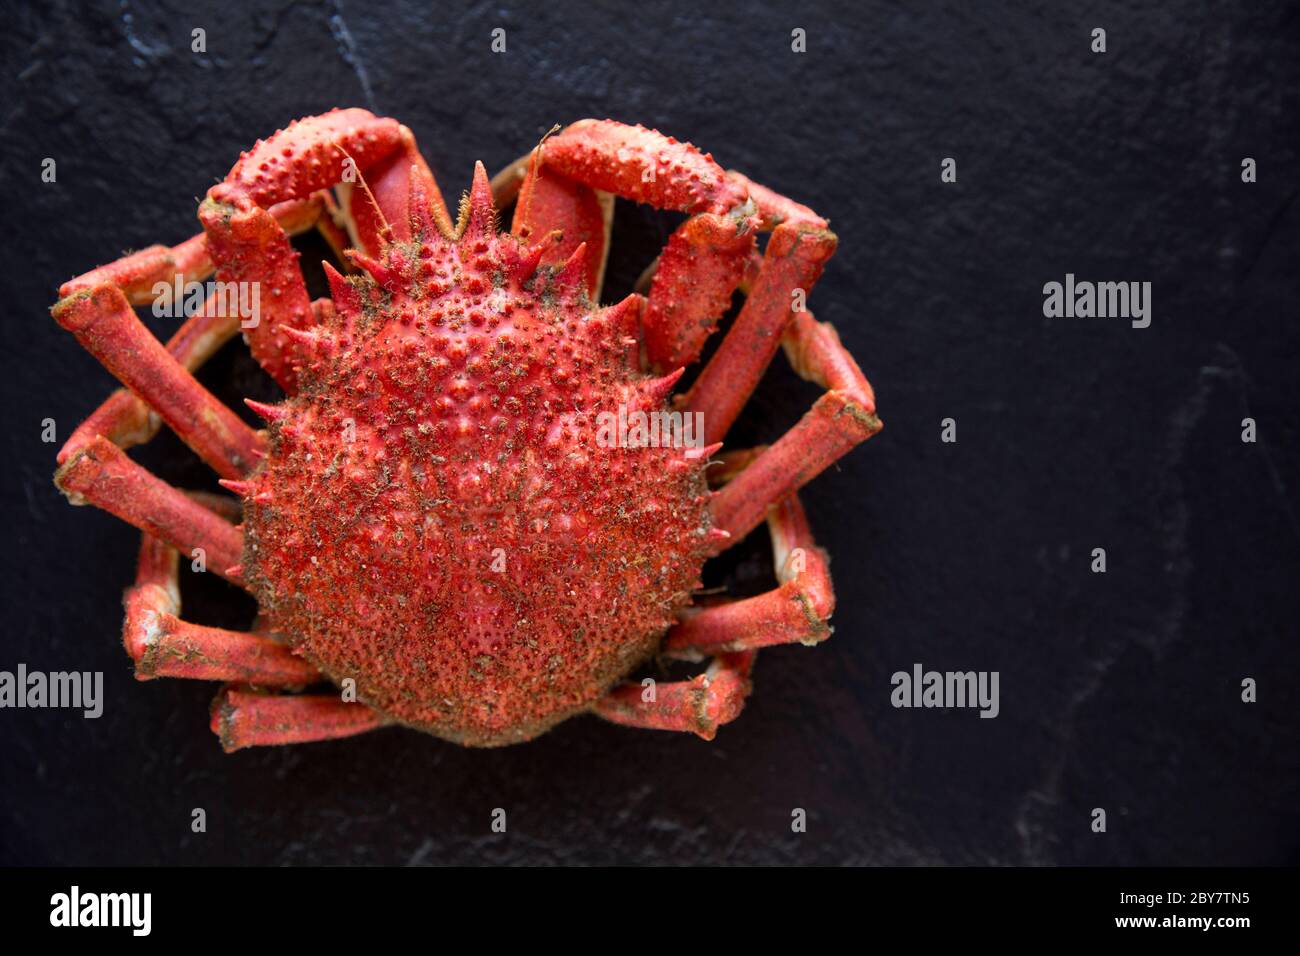 A boiled, cooked spider crab, Maja brachydactyla, caught in the English Channel. Dorset England UK GB Stock Photo